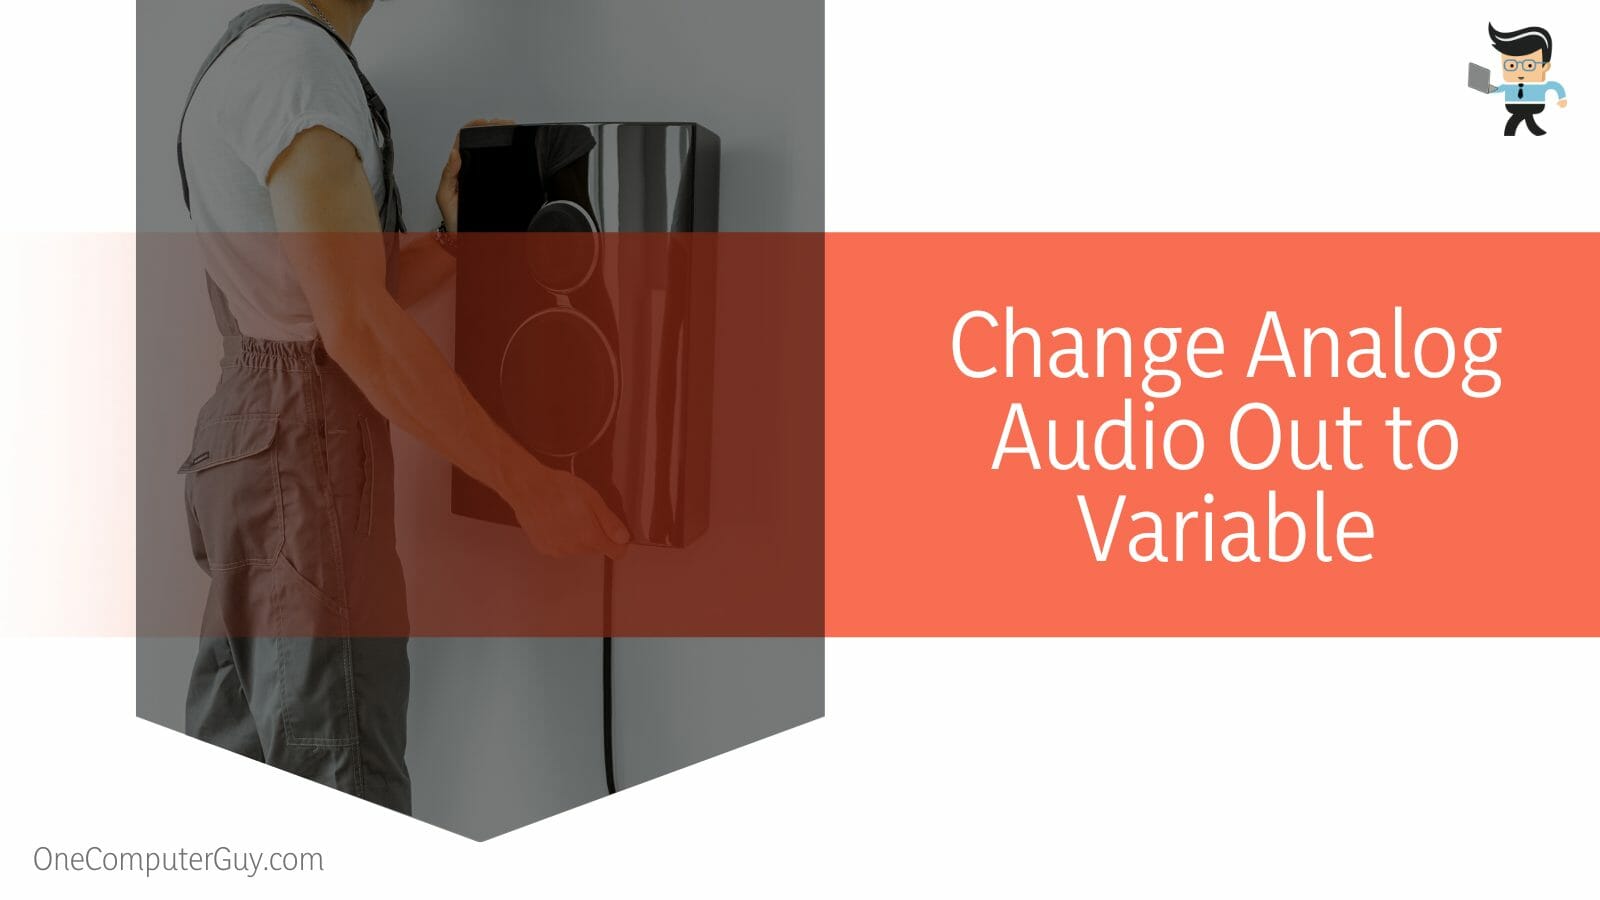 Change Analog Audio Out to Variable